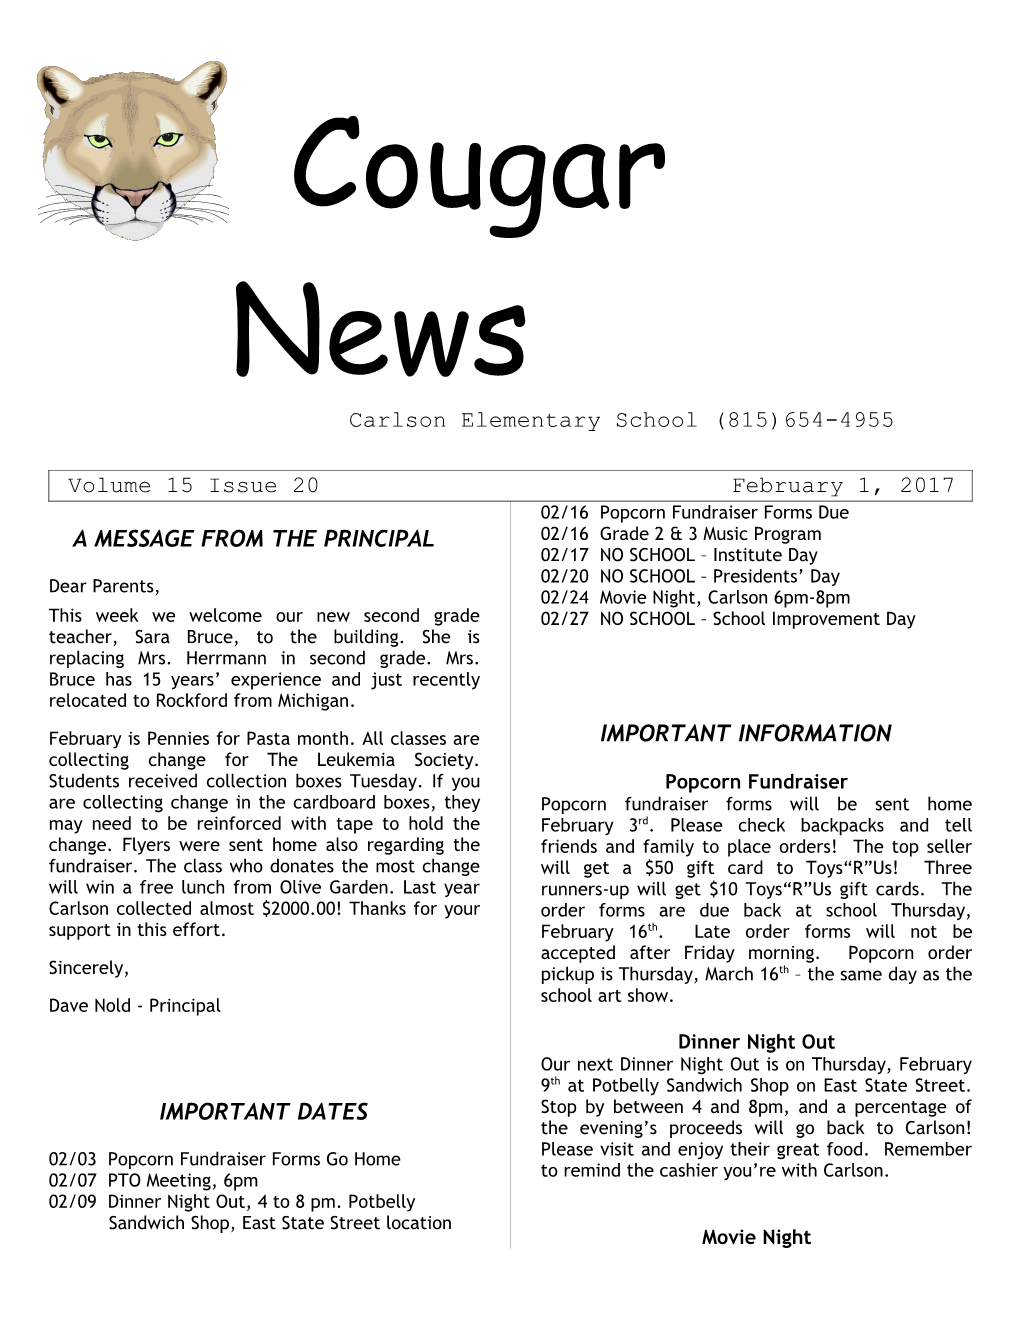 21 Cougar News for February 1 2017